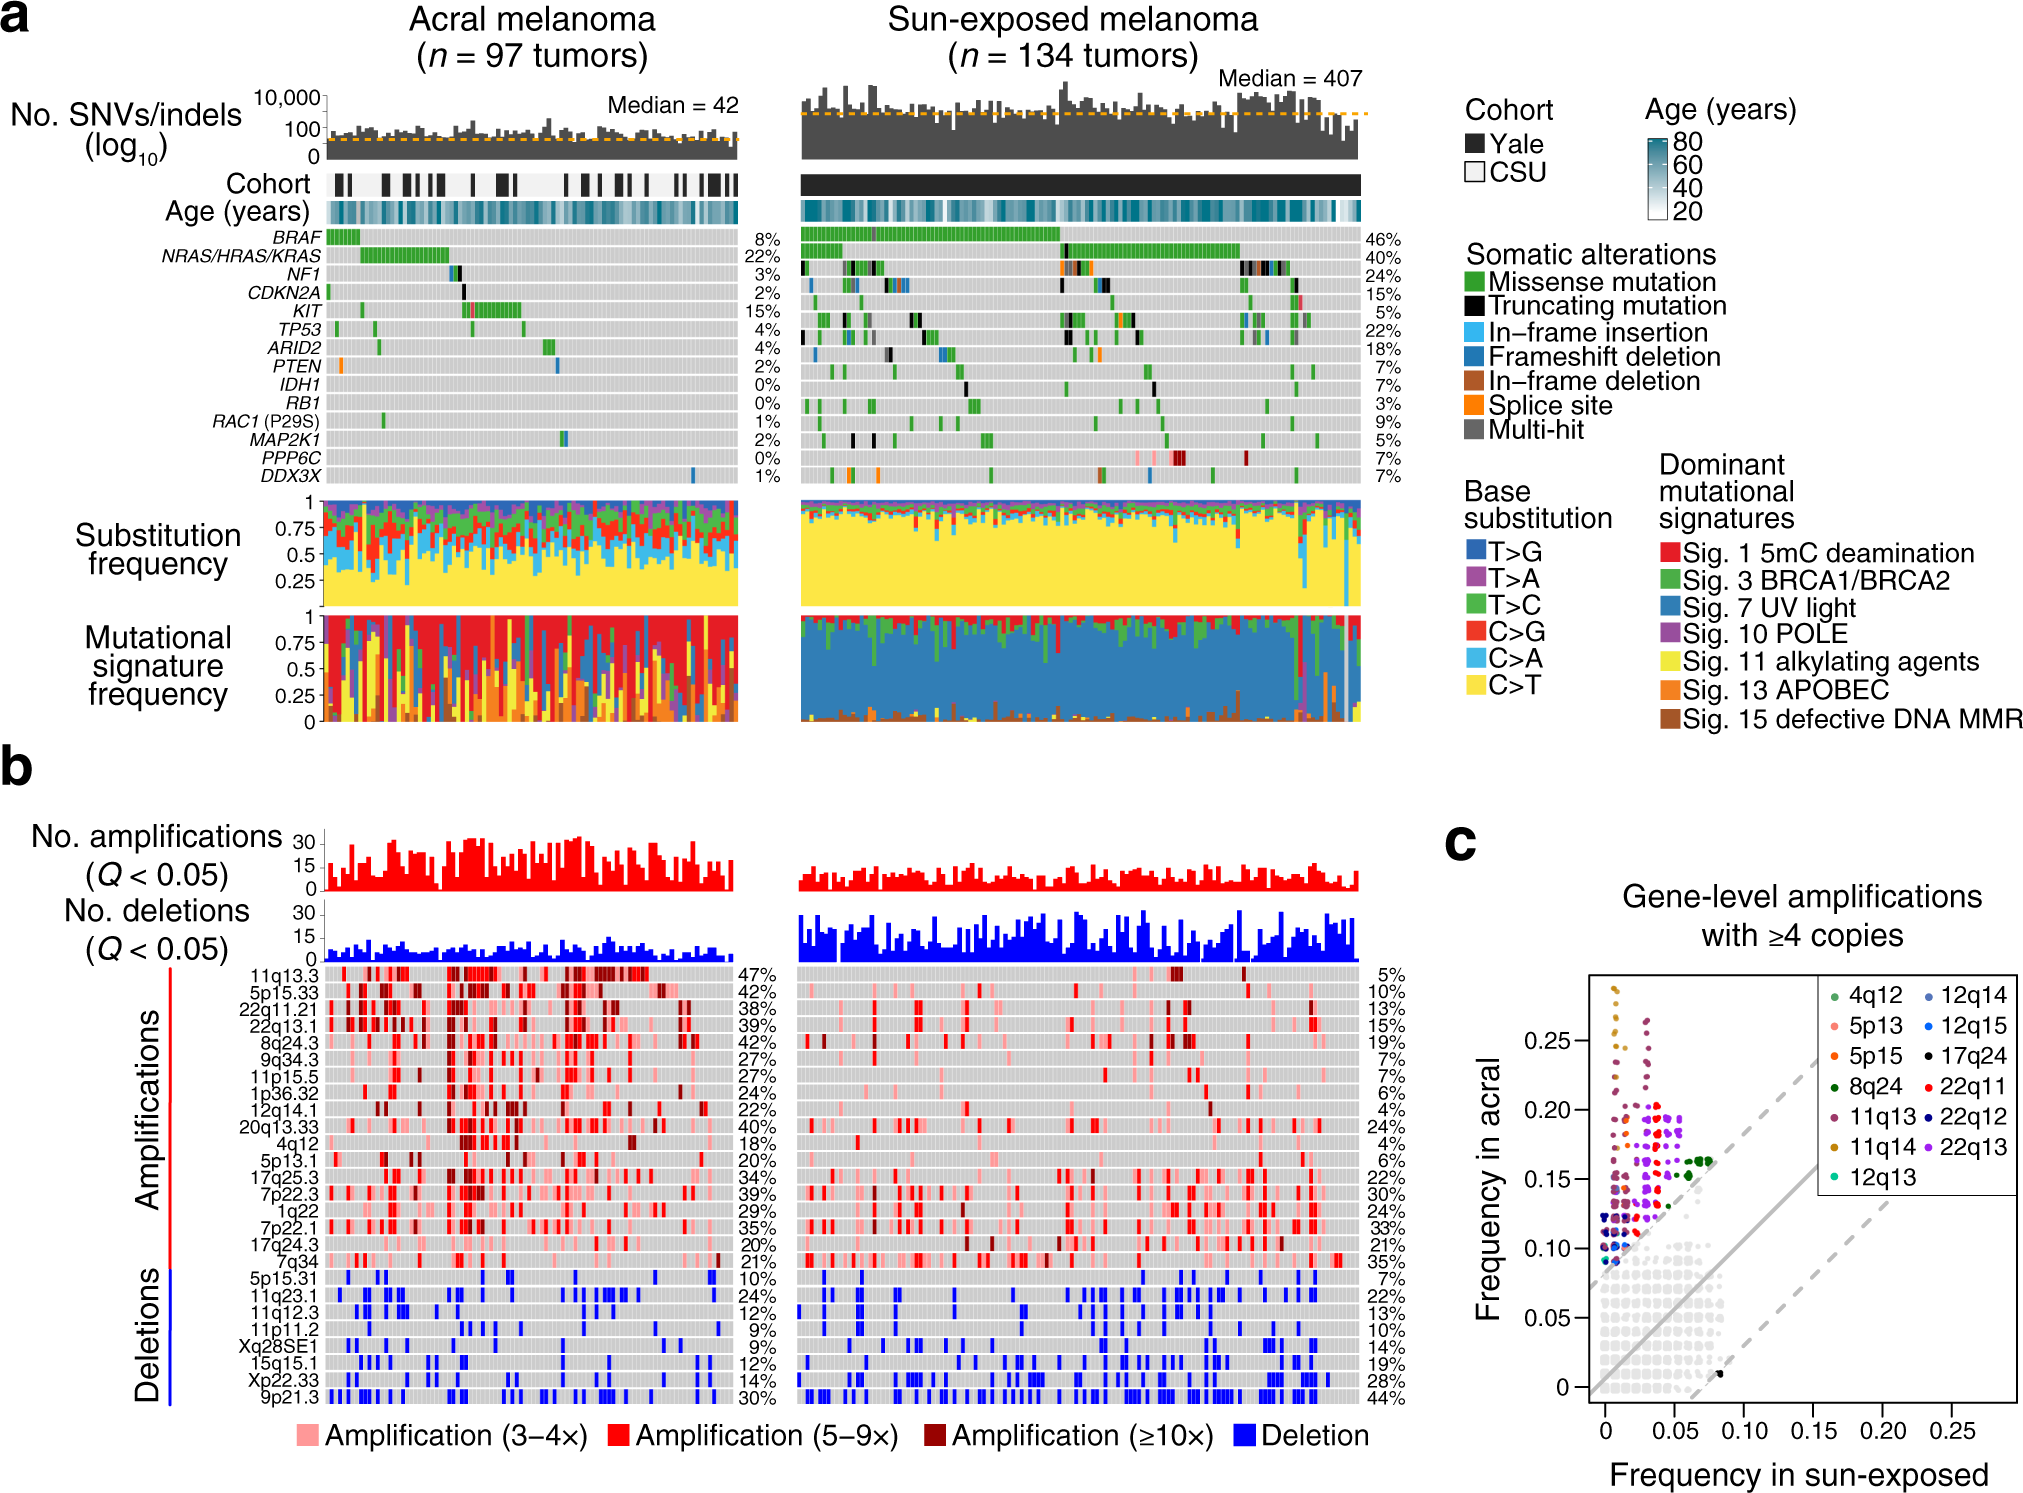 Integrative molecular and clinical profiling of acral melanoma links focal  amplification of 22q11.21 to metastasis | Nature Communications